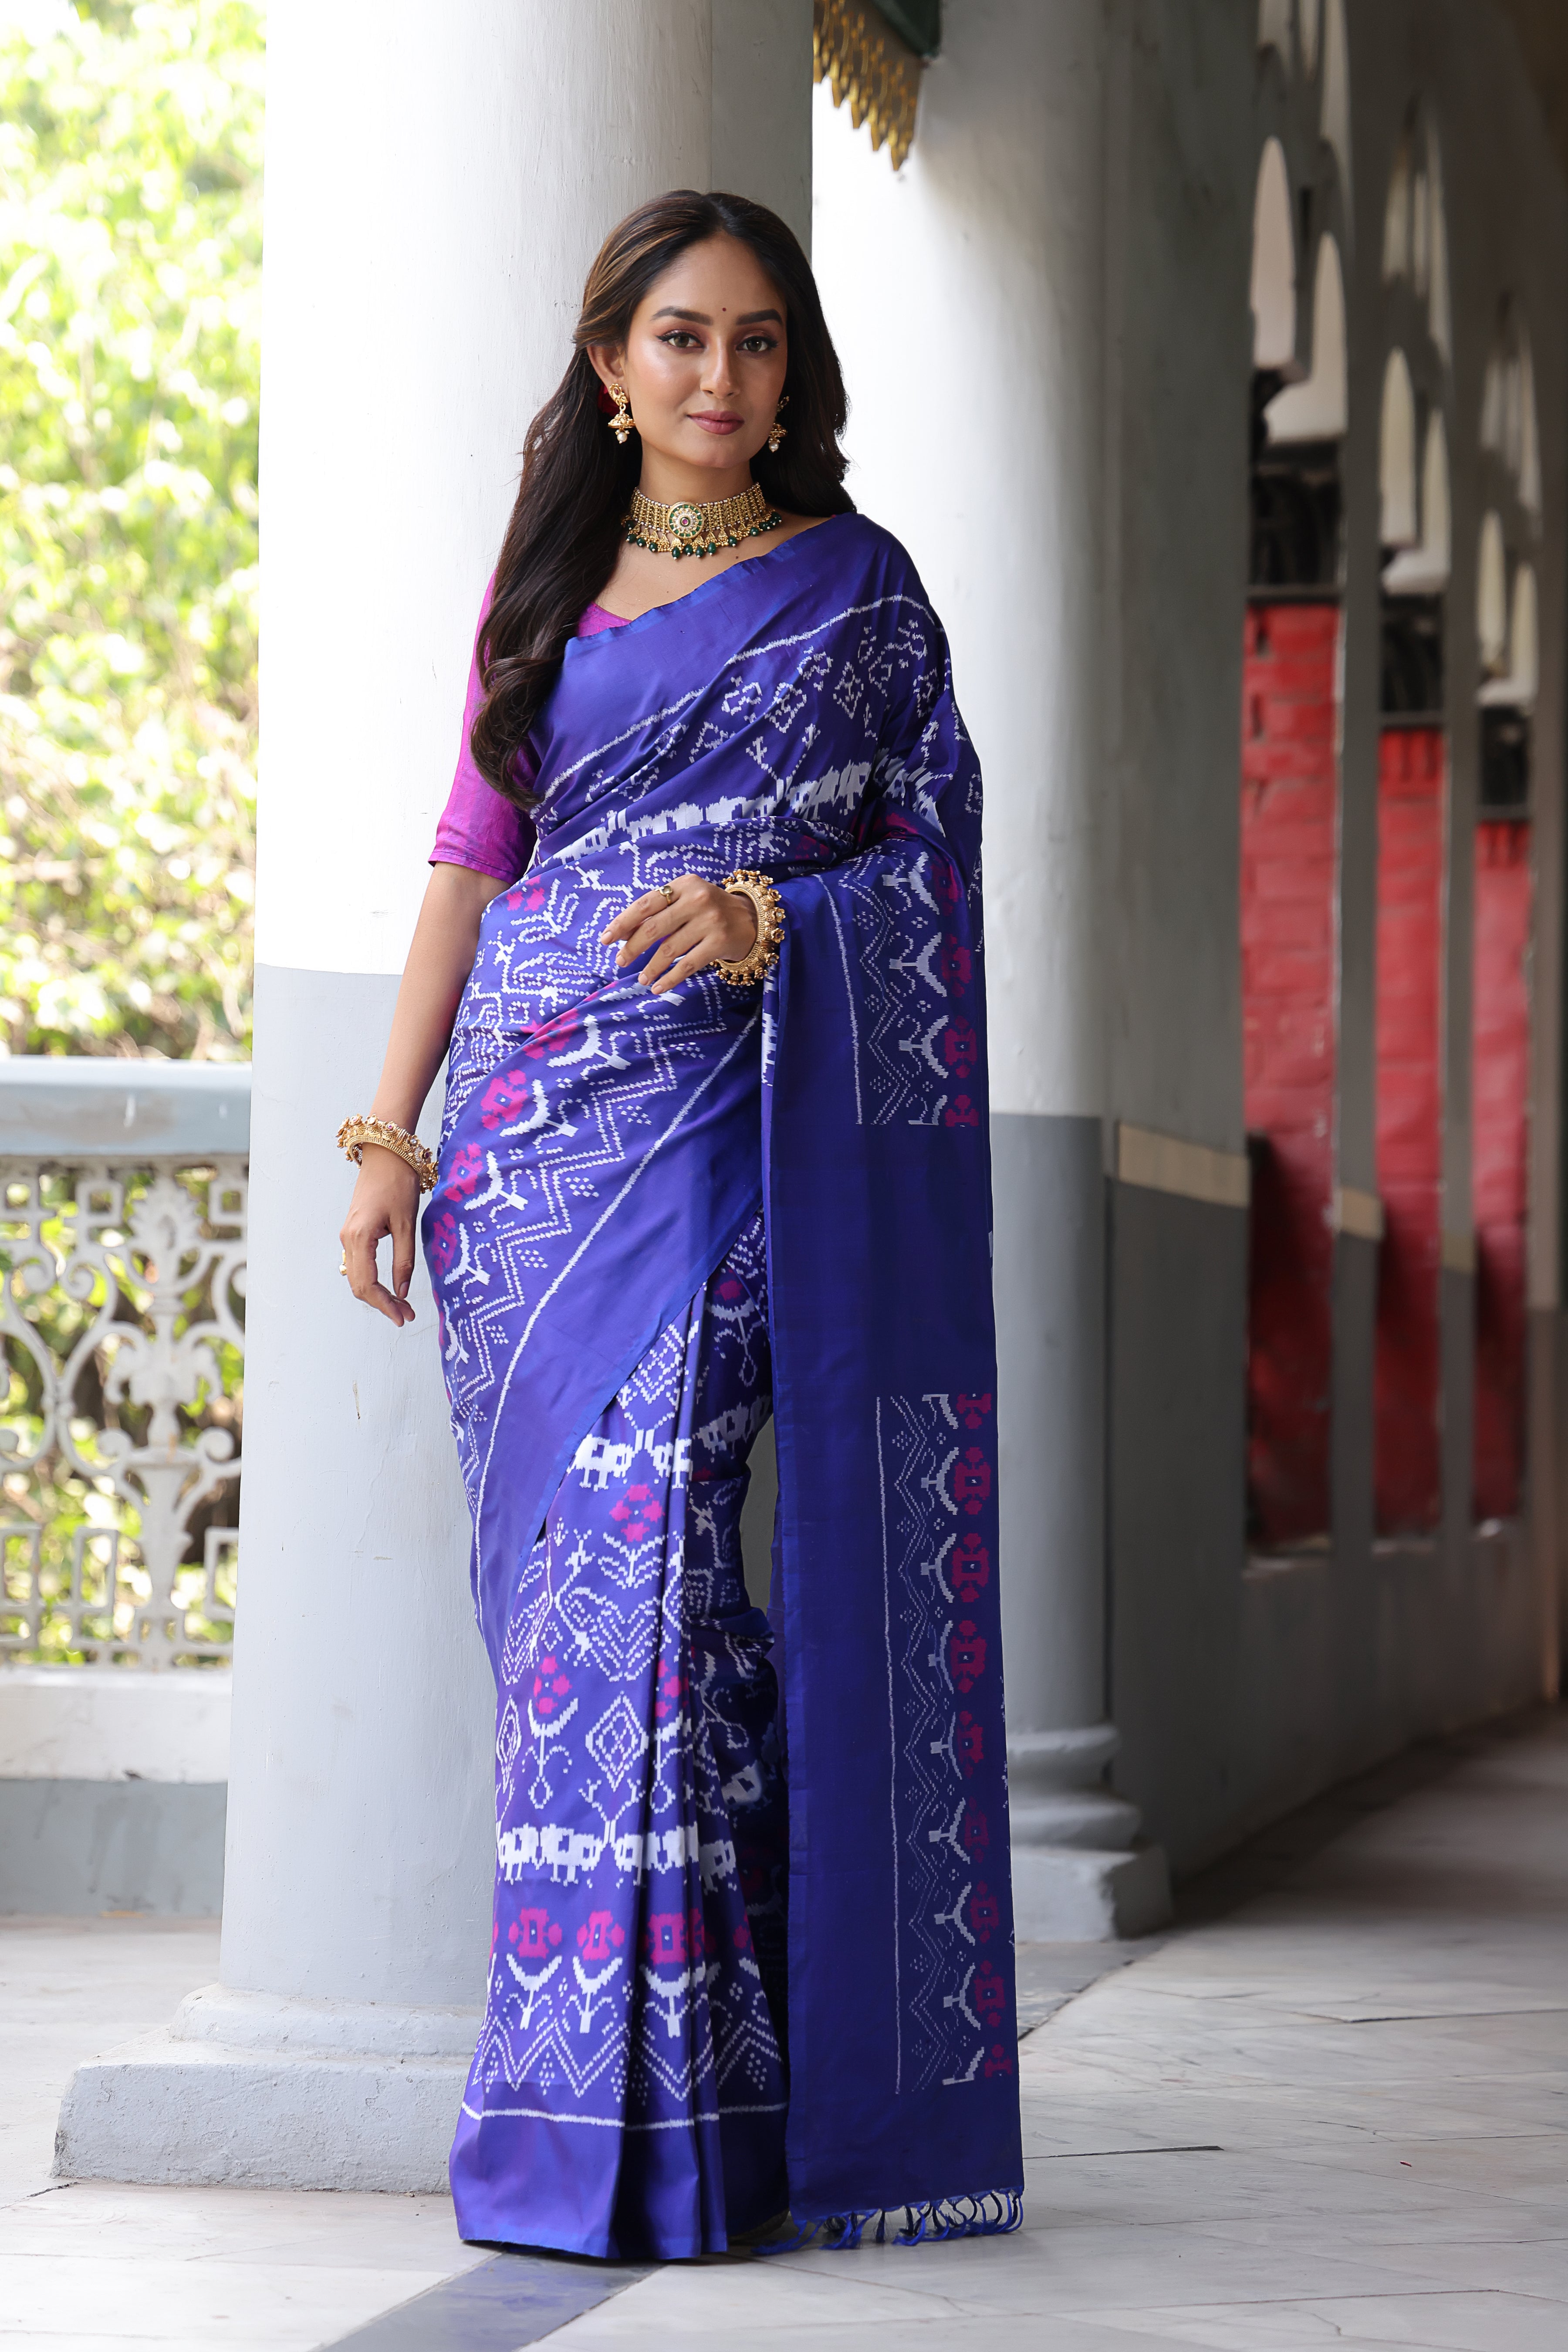 A stupendous bluish purple with pink Cambodian inspired museum archive silk ikkat saree